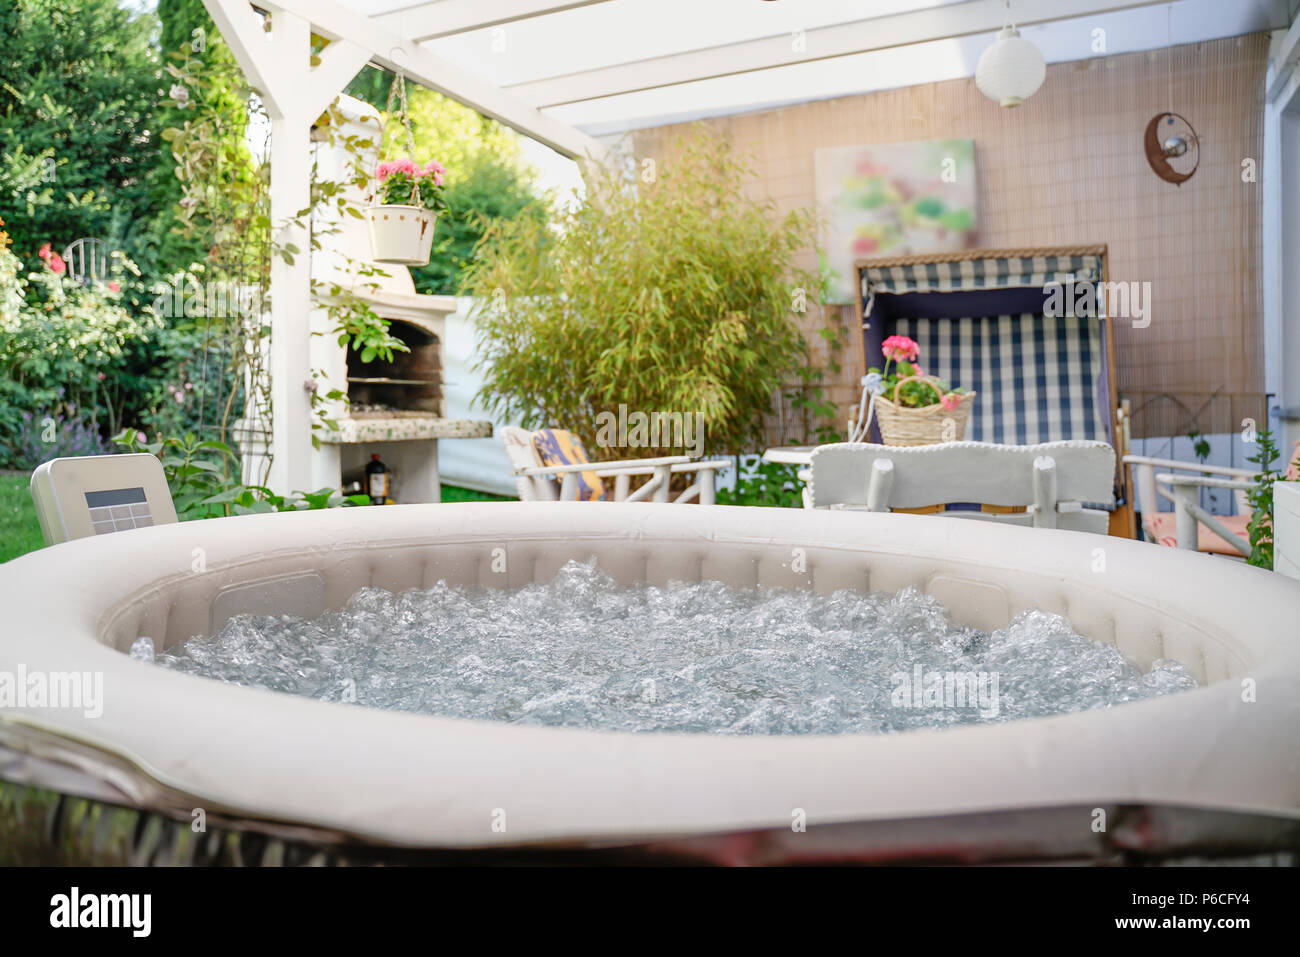 Jacuzzi Europe - Whether in a garden, terrace or interior